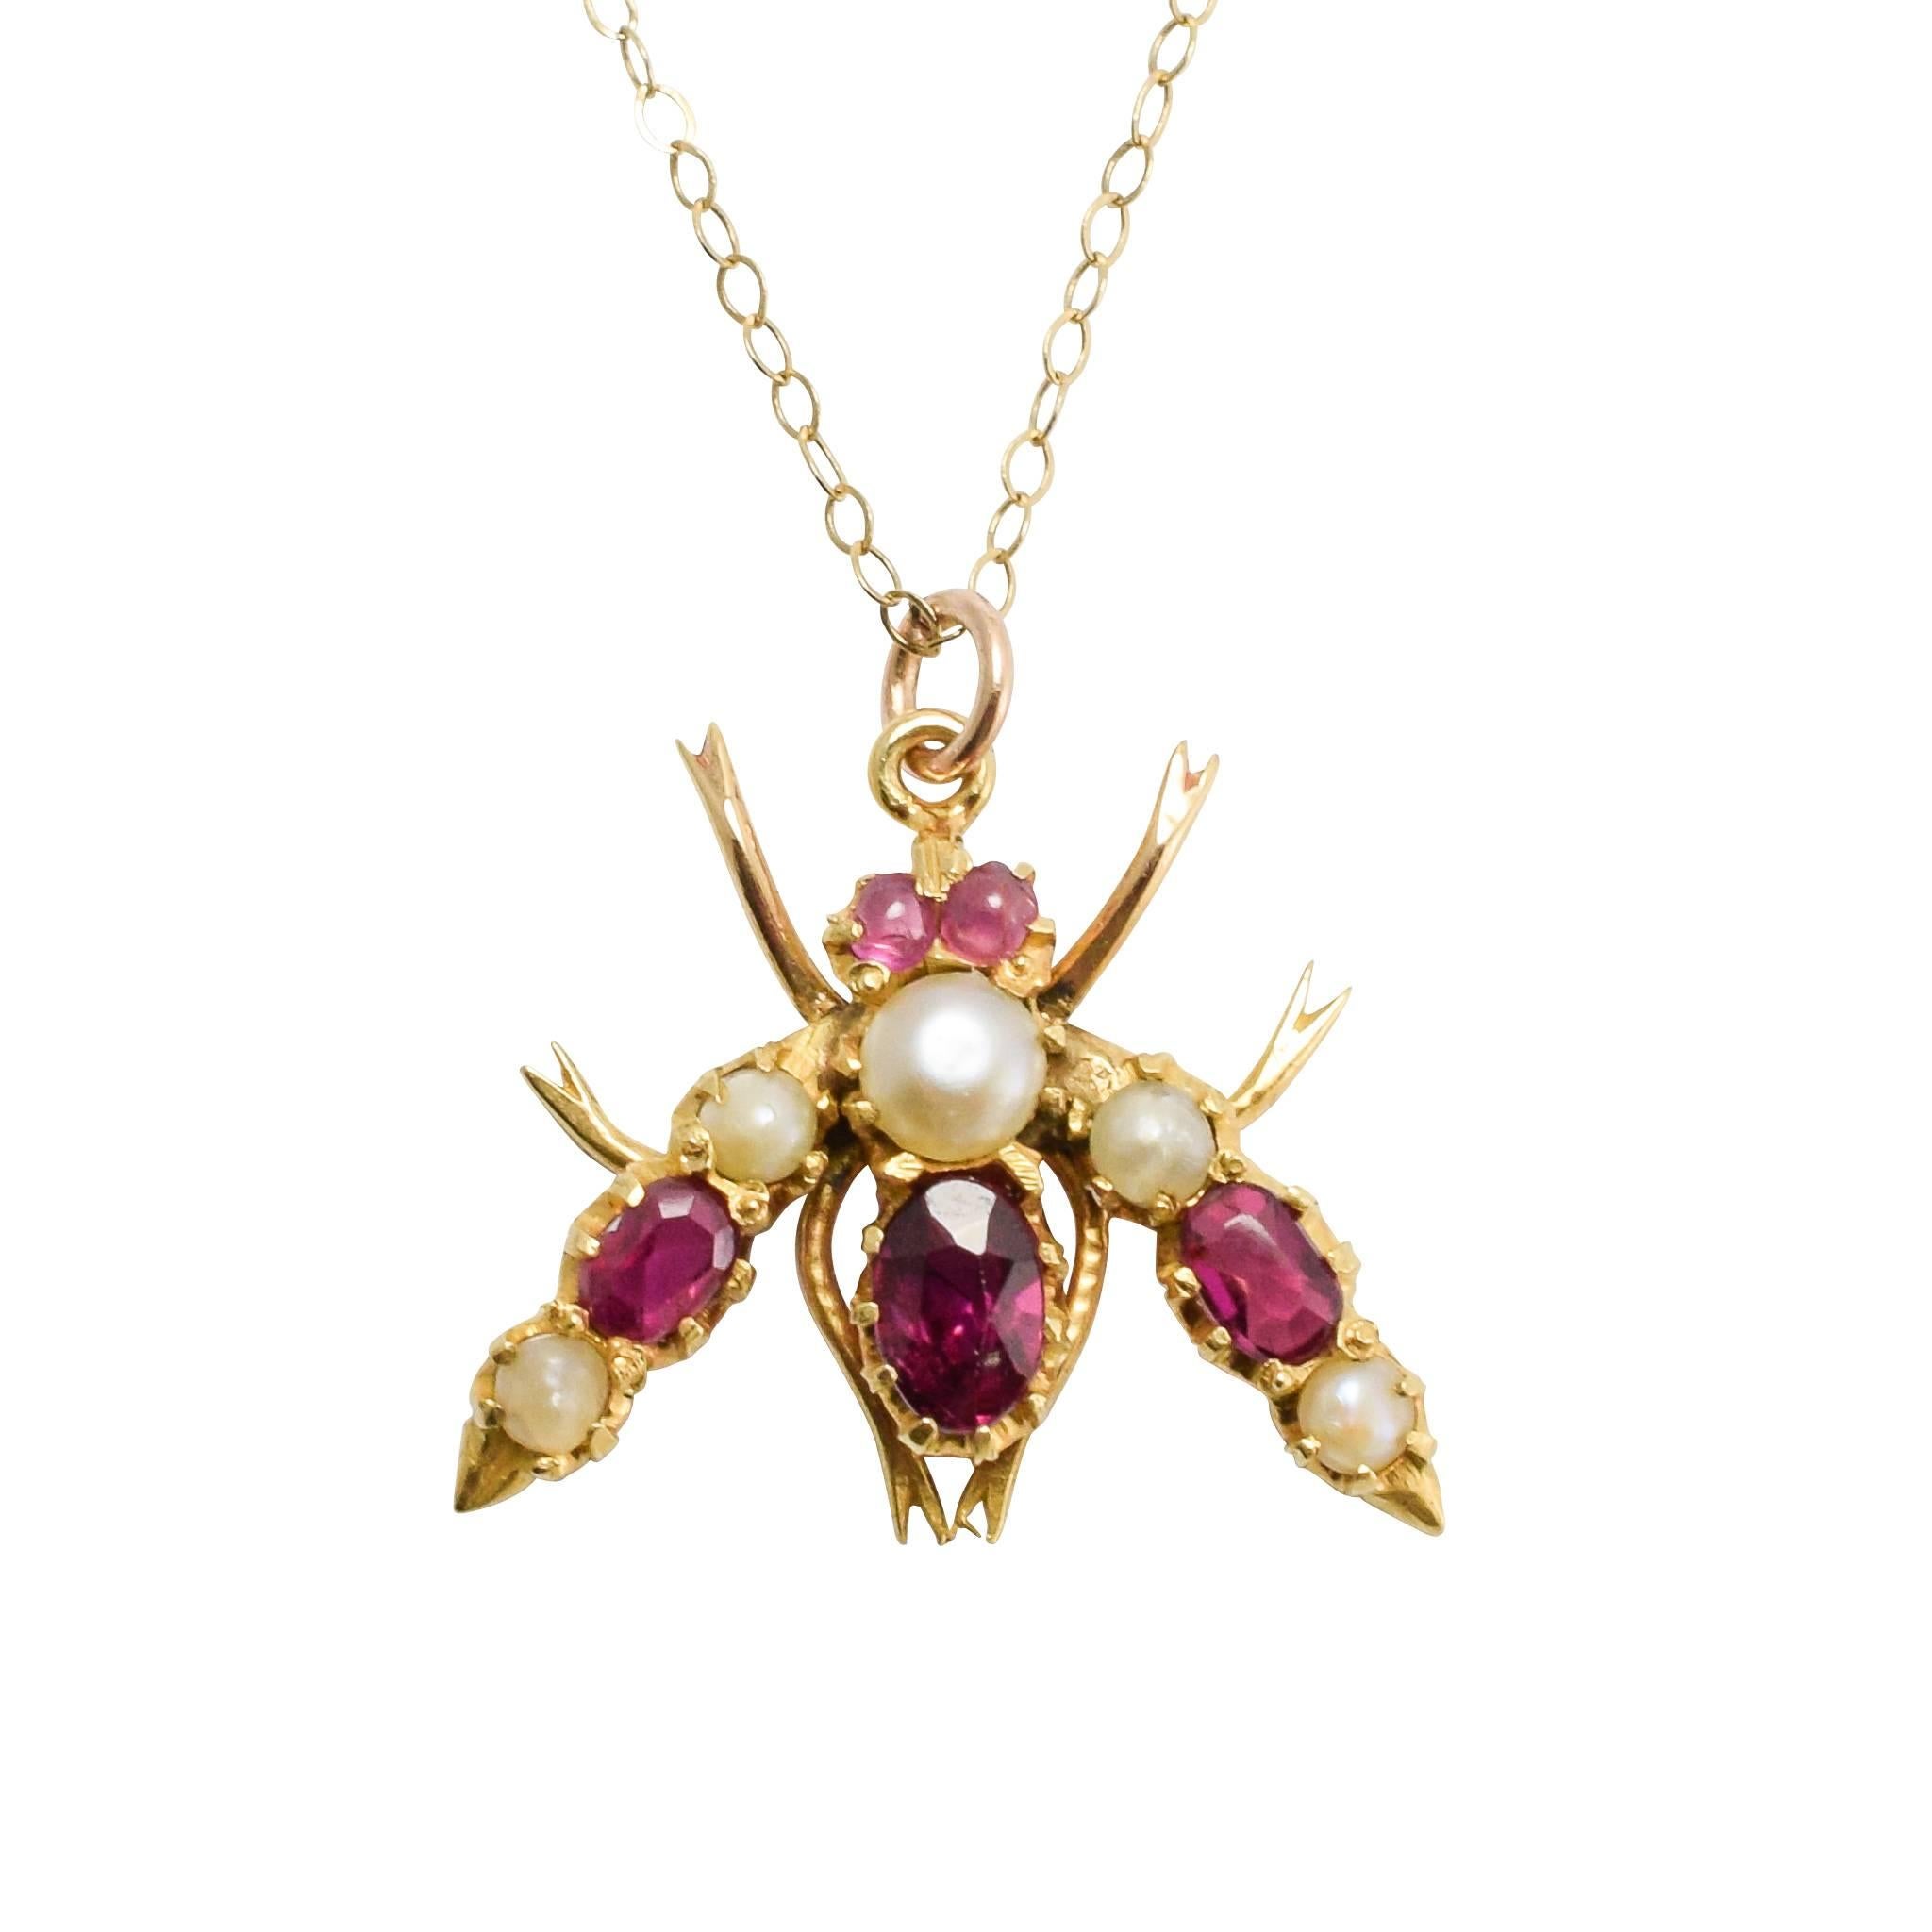 Antique Victorian Ruby Pearl Fly Pendant Necklace